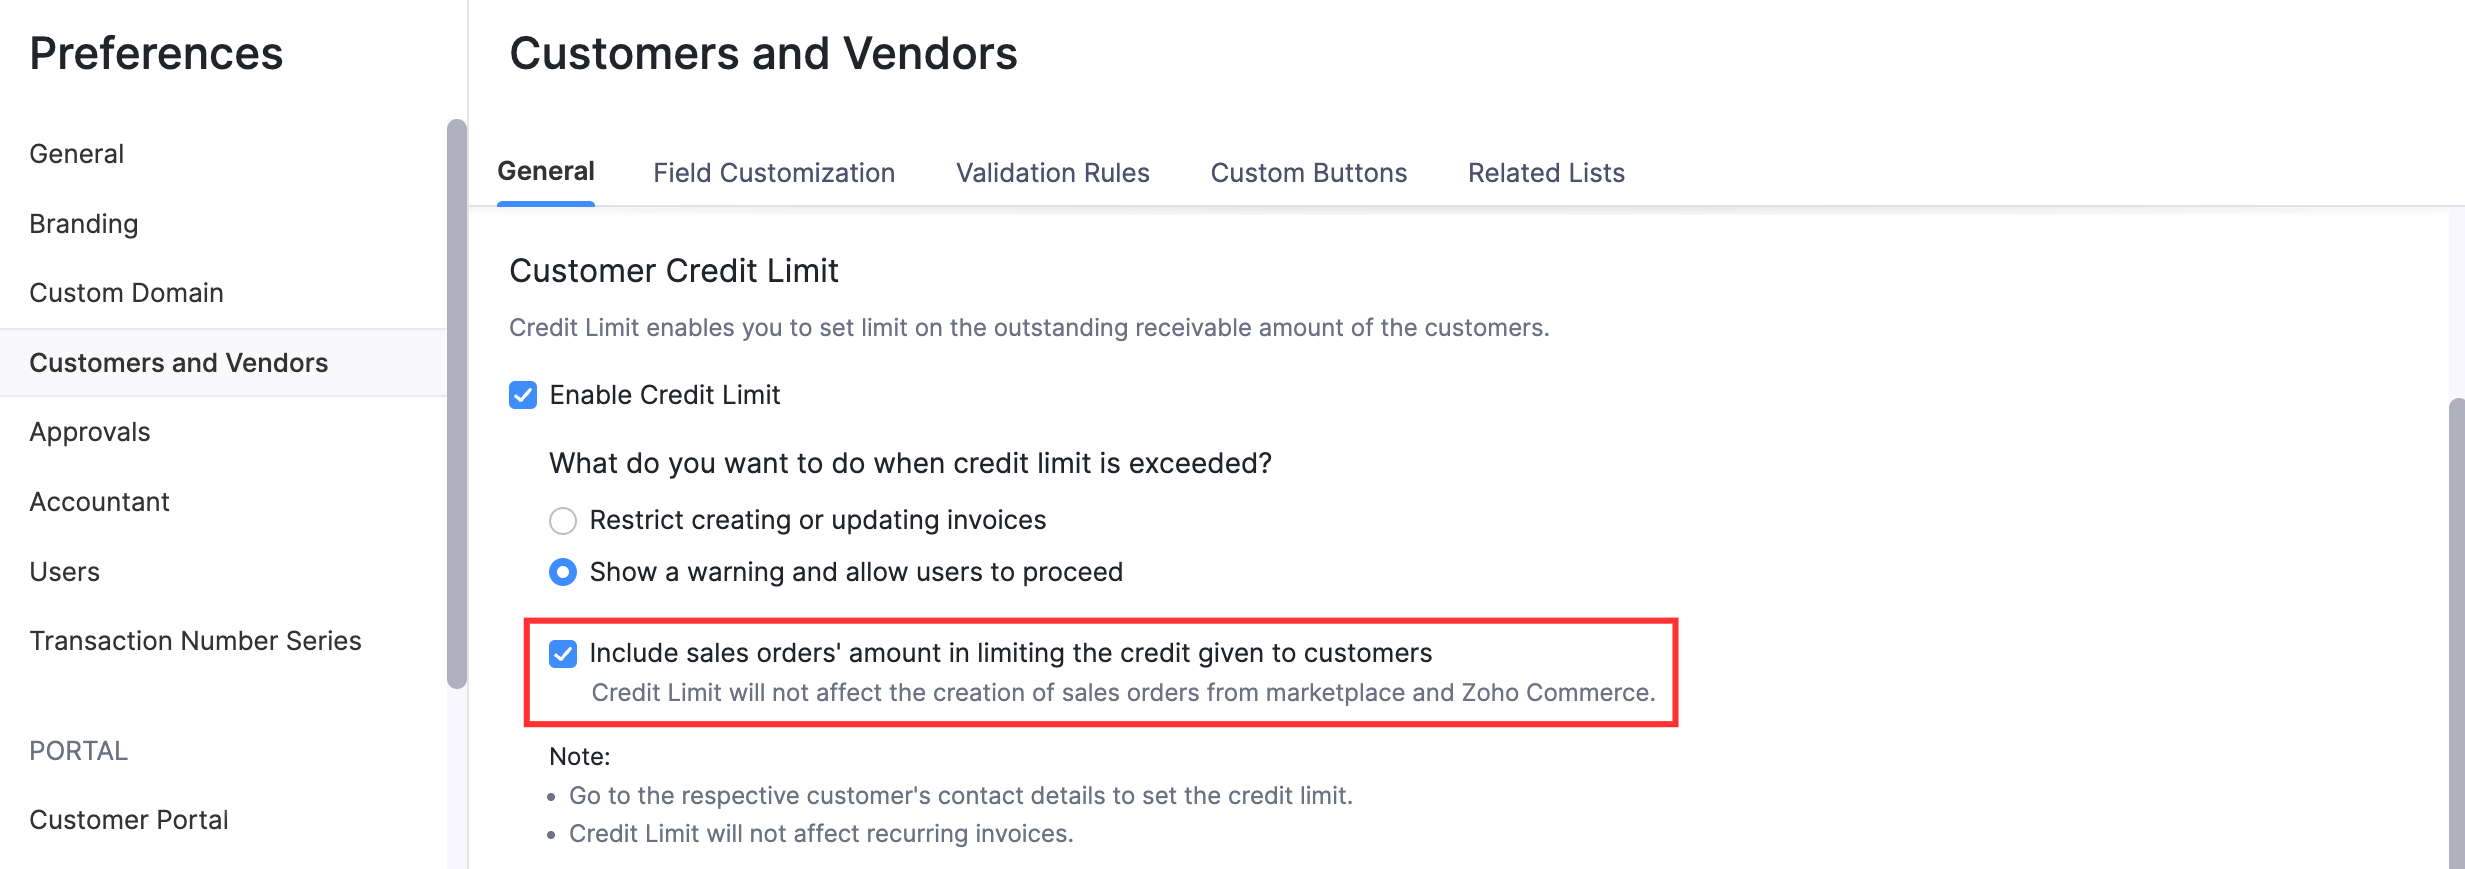 Include sales orders in customers' credit limit